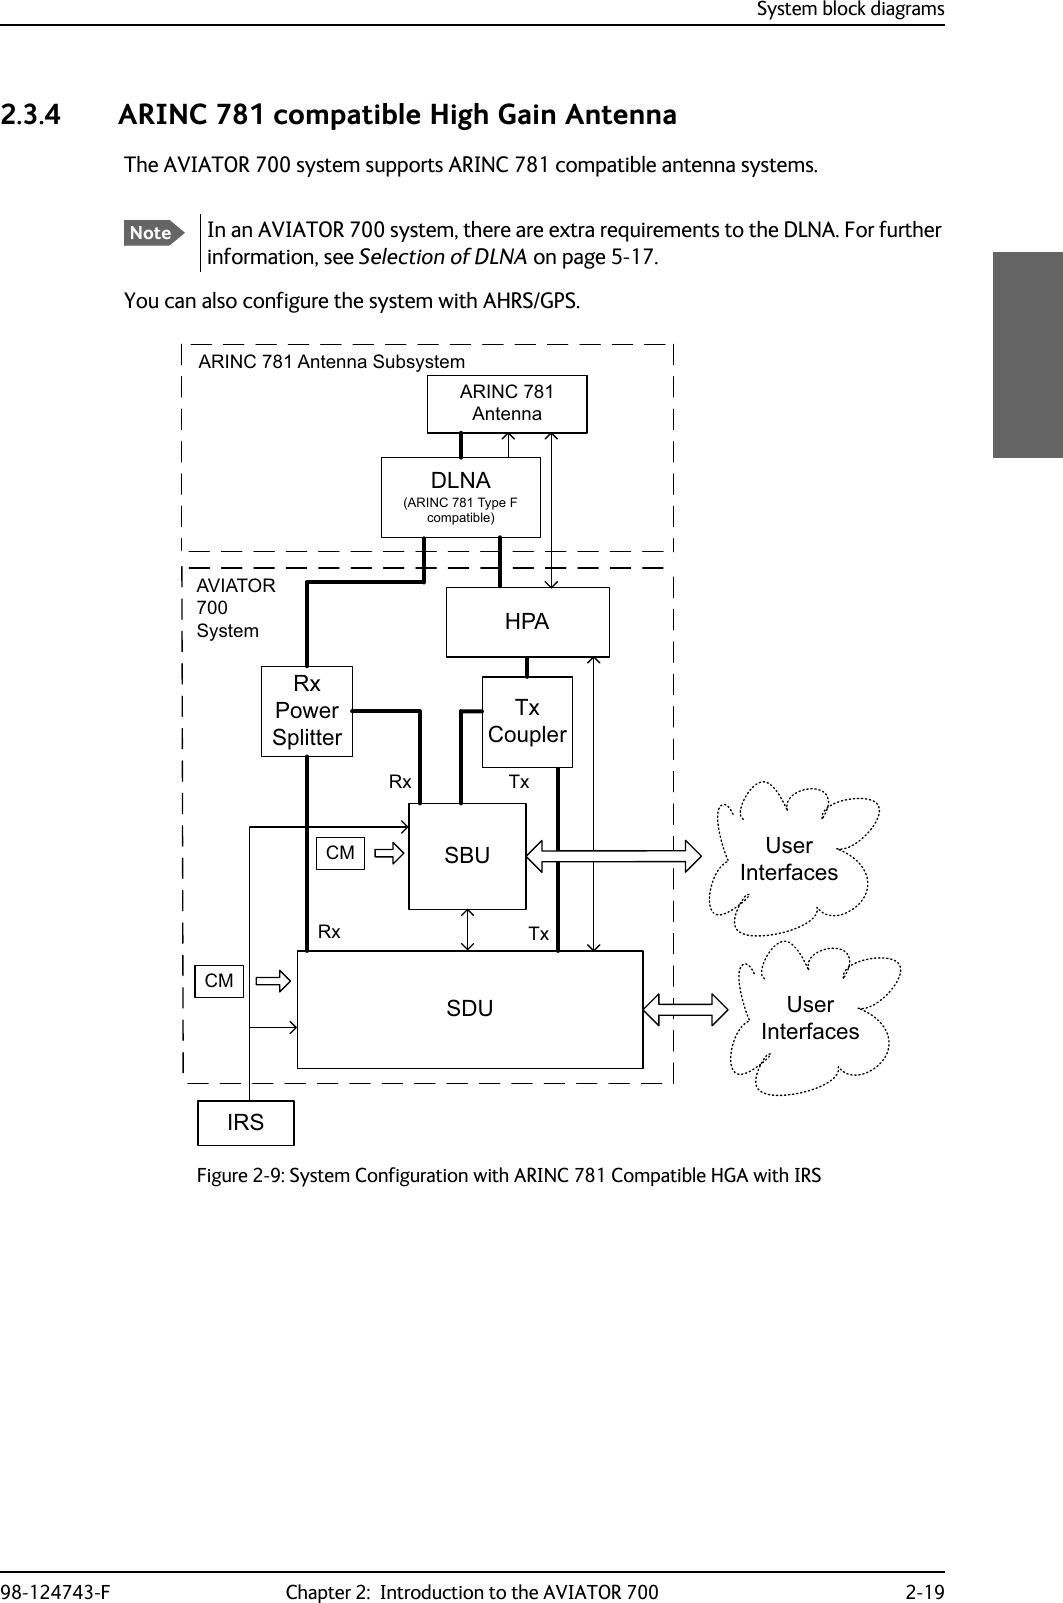 System block diagrams98-124743-F Chapter 2:  Introduction to the AVIATOR 700 2-192.3.4 ARINC 781 compatible High Gain AntennaThe AVIATOR 700 system supports ARINC 781 compatible antenna systems.Figure 2-9: System Configuration with ARINC 781 Compatible HGA with IRSYou can also configure the system with AHRS/GPS.NoteIn an AVIATOR 700 system, there are extra requirements to the DLNA. For further information, see Selection of DLNA on page 5-17.$5,1&amp;$QWHQQD+3$&apos;/1$$5,1&amp;7\SH)FRPSDWLEOH6&apos;8&amp;08VHU,QWHUIDFHV7[5[6%8 8VHU,QWHUIDFHV7[5[5[3RZHU6SOLWWHU7[&amp;RXSOHU&amp;0$9,$7256\VWHP,56$5,1&amp;$QWHQQD6XEV\VWHP